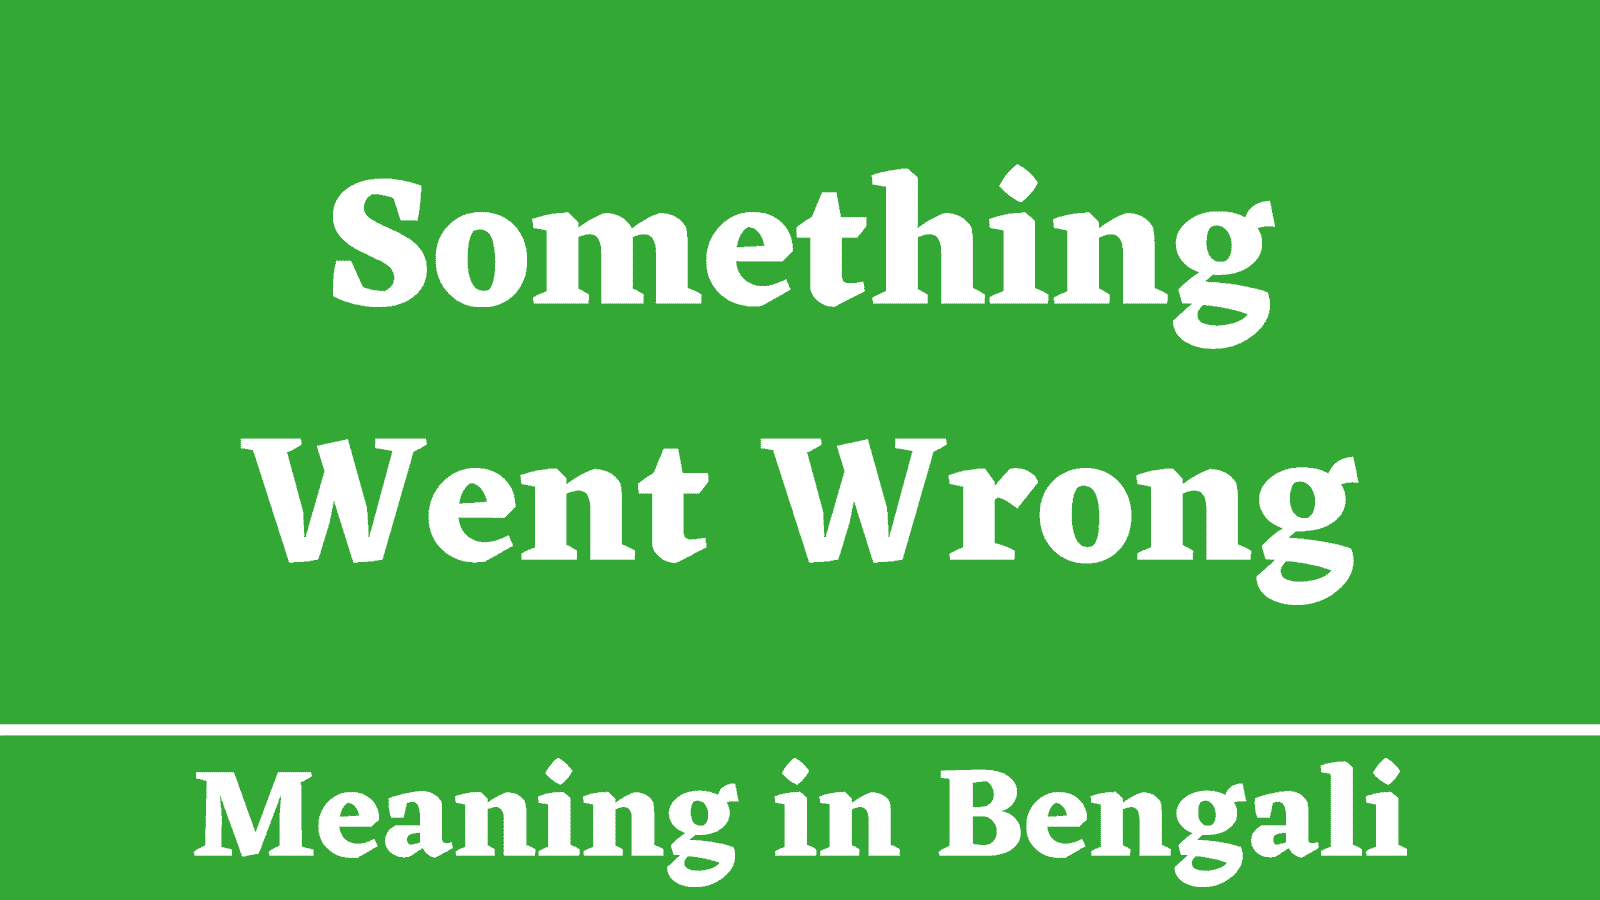 Something Went Wrong Meaning in Bengali